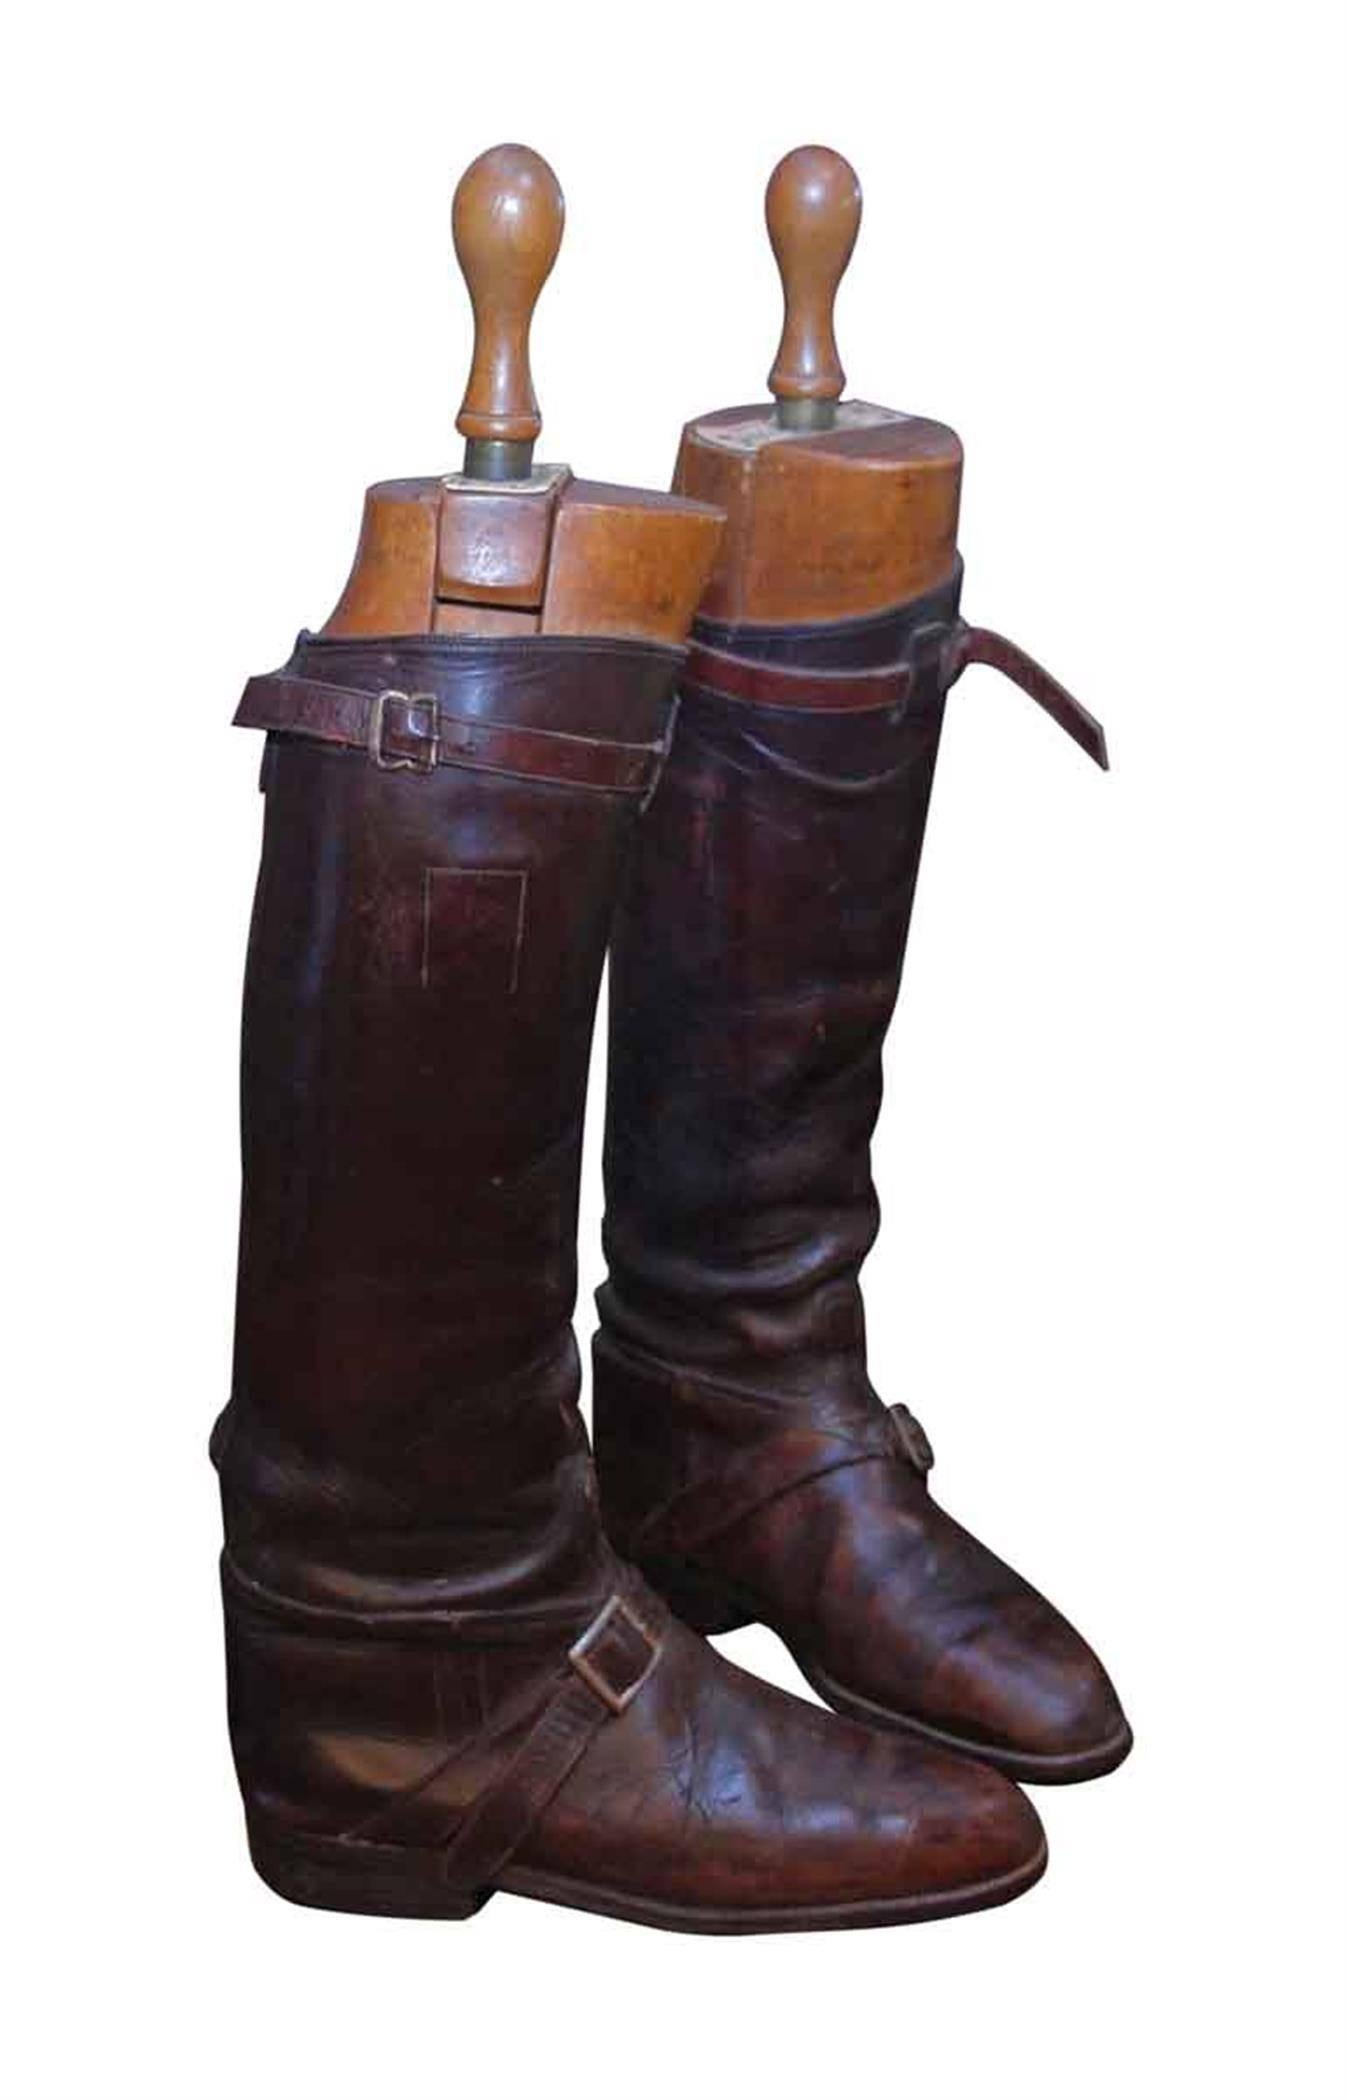 1950s pair of vintage English Polo brown leather boots with custom boot straps. The boots come with vintage, light wood toned Peal & Co. Ltd. stretchers. This can be seen at our 2420 Broadway location on the upper west side in Manhattan.